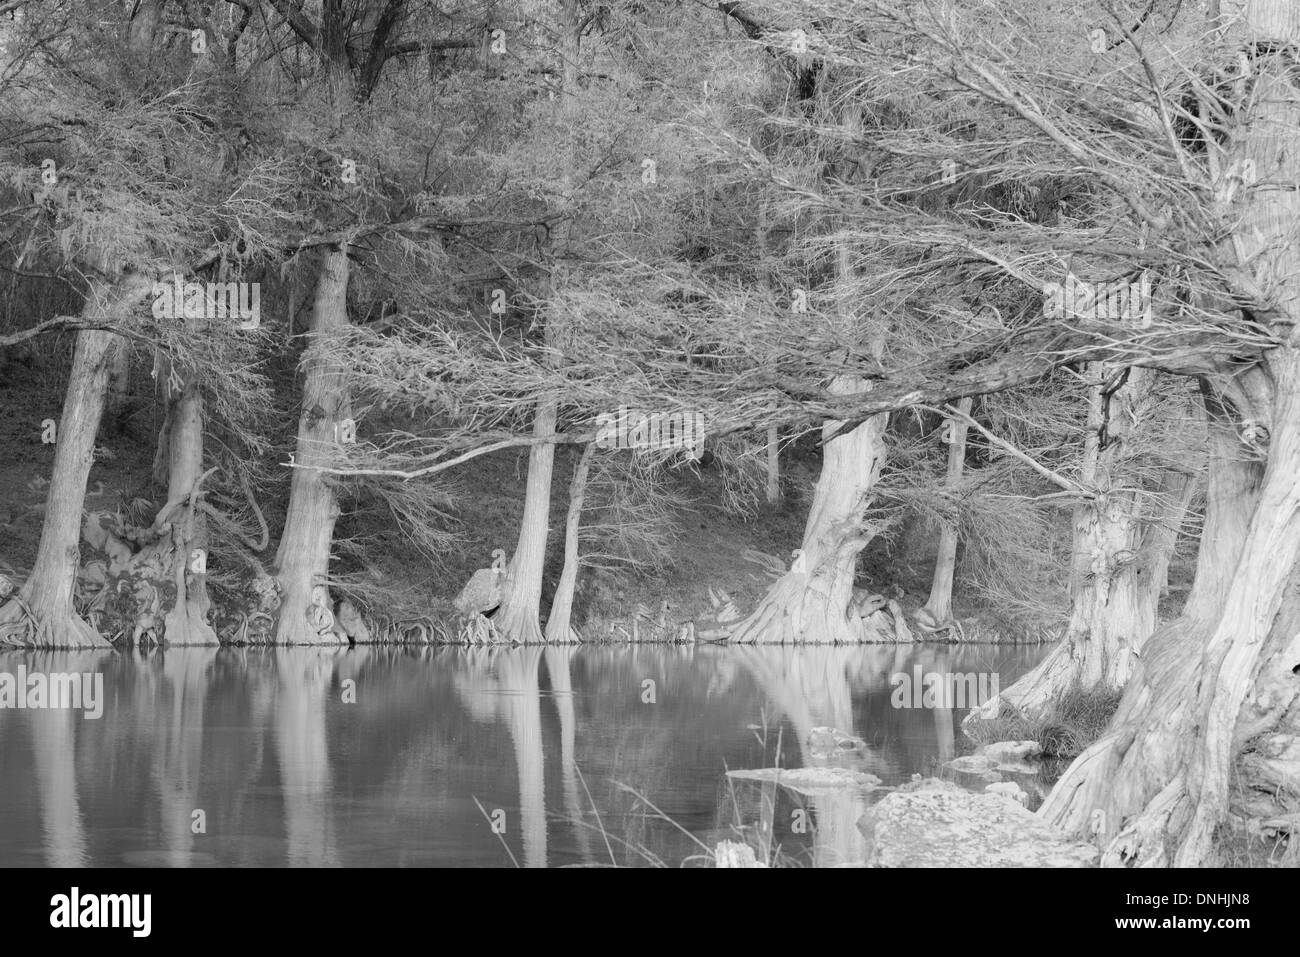 Bald Cypress Trees reflecting in the still waters of the Guadalupe River in Texas in black and white Stock Photo